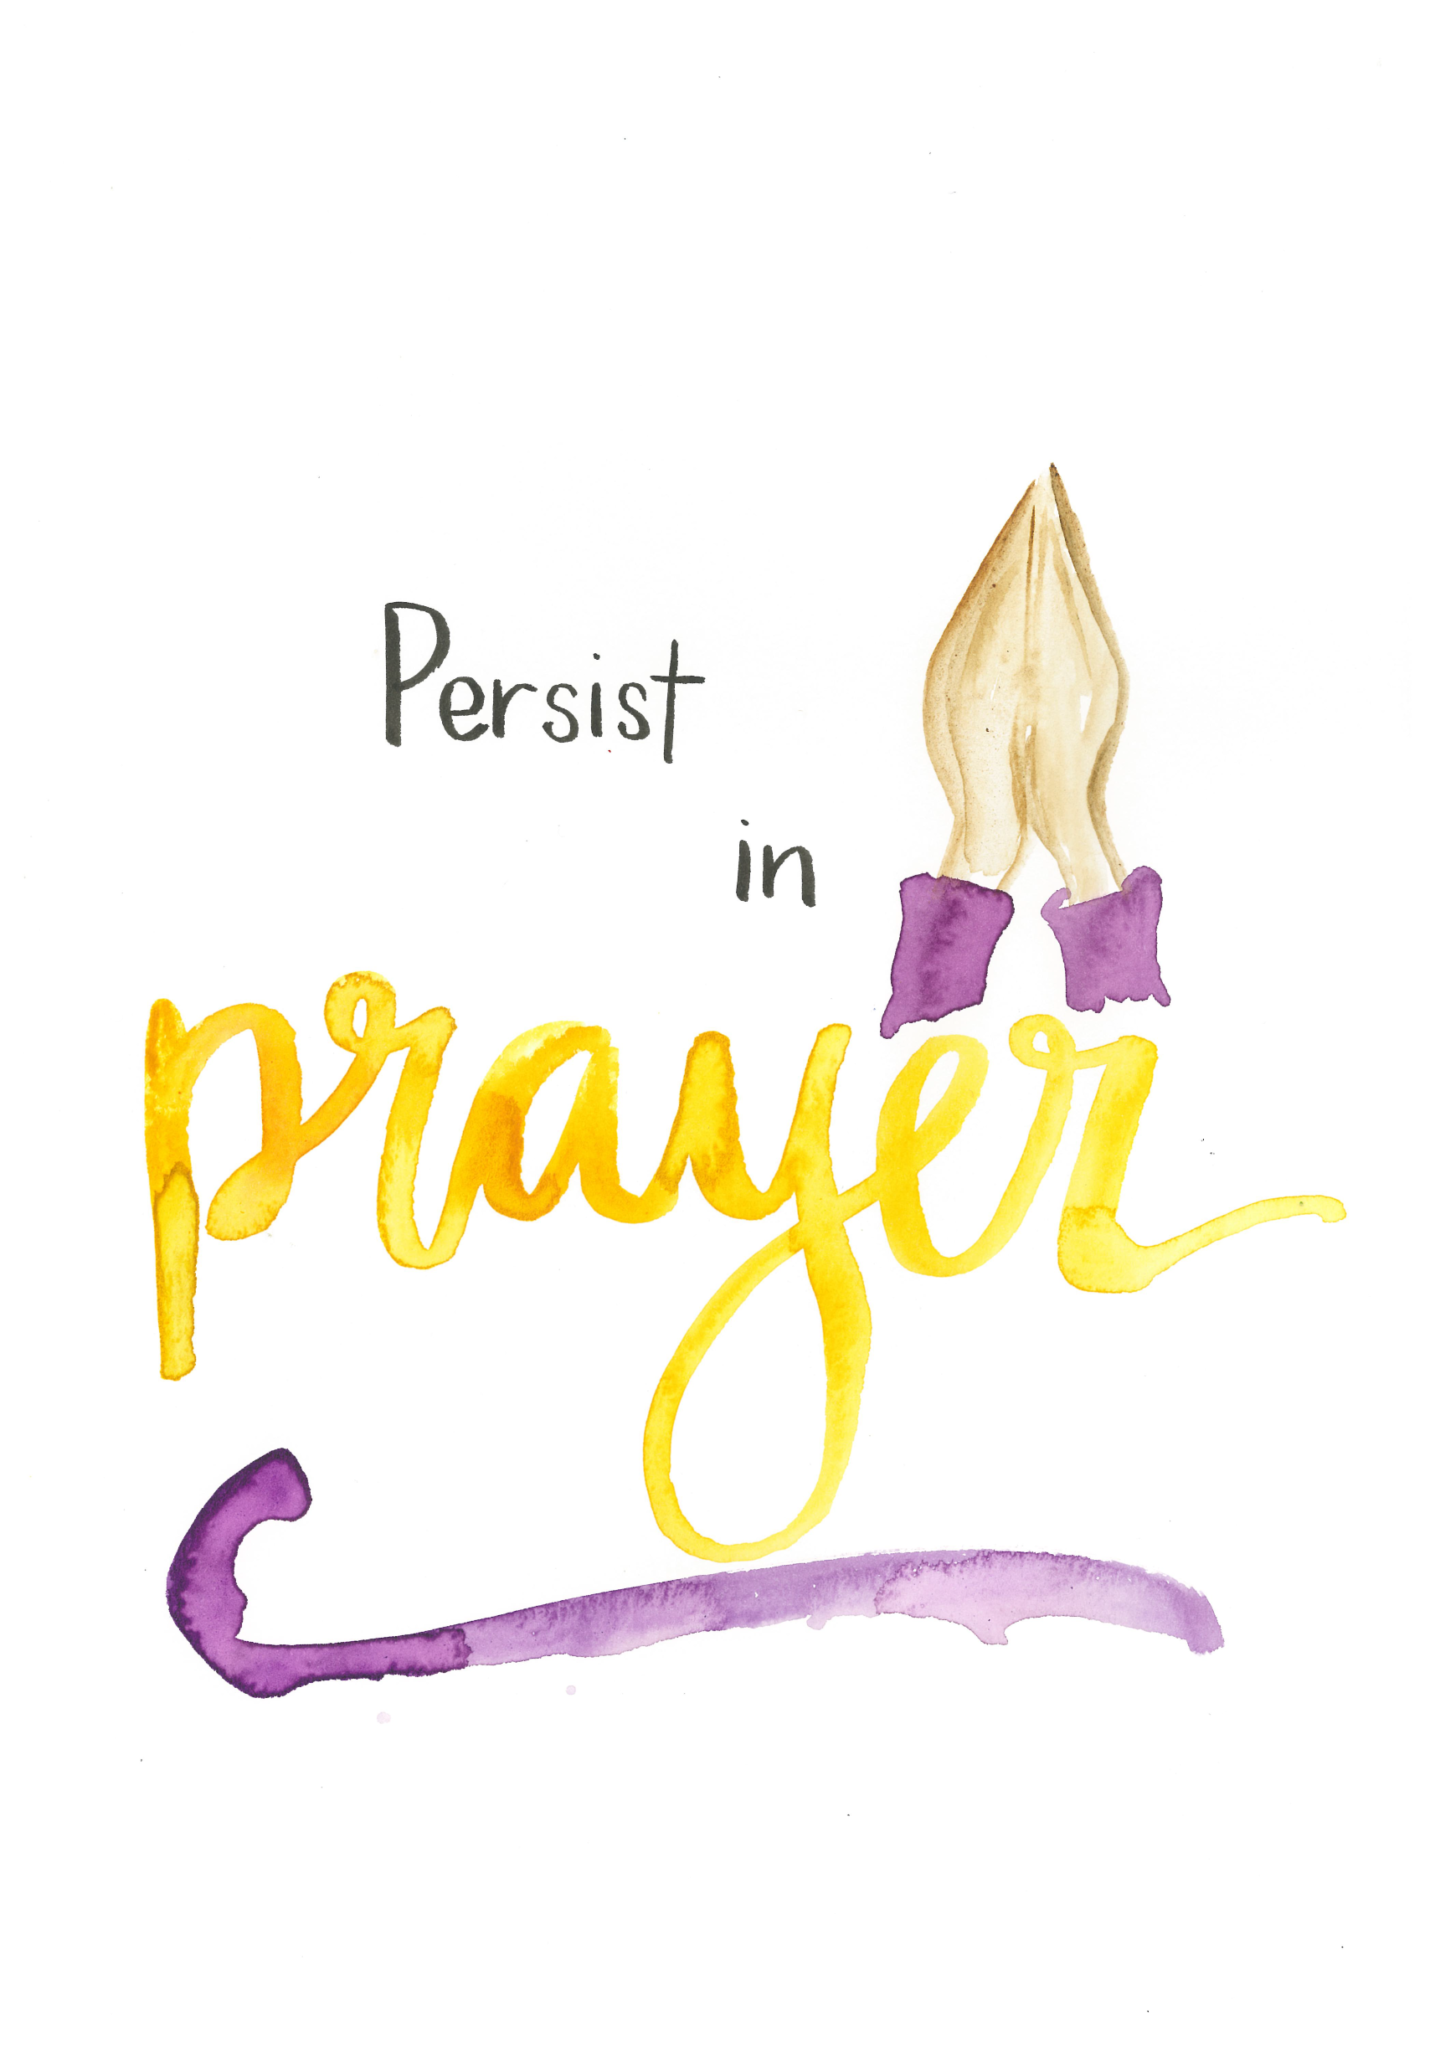 The words "persist in prayer" with praying hands, inspired by the Parable of the Persistent Widow in Luke 18